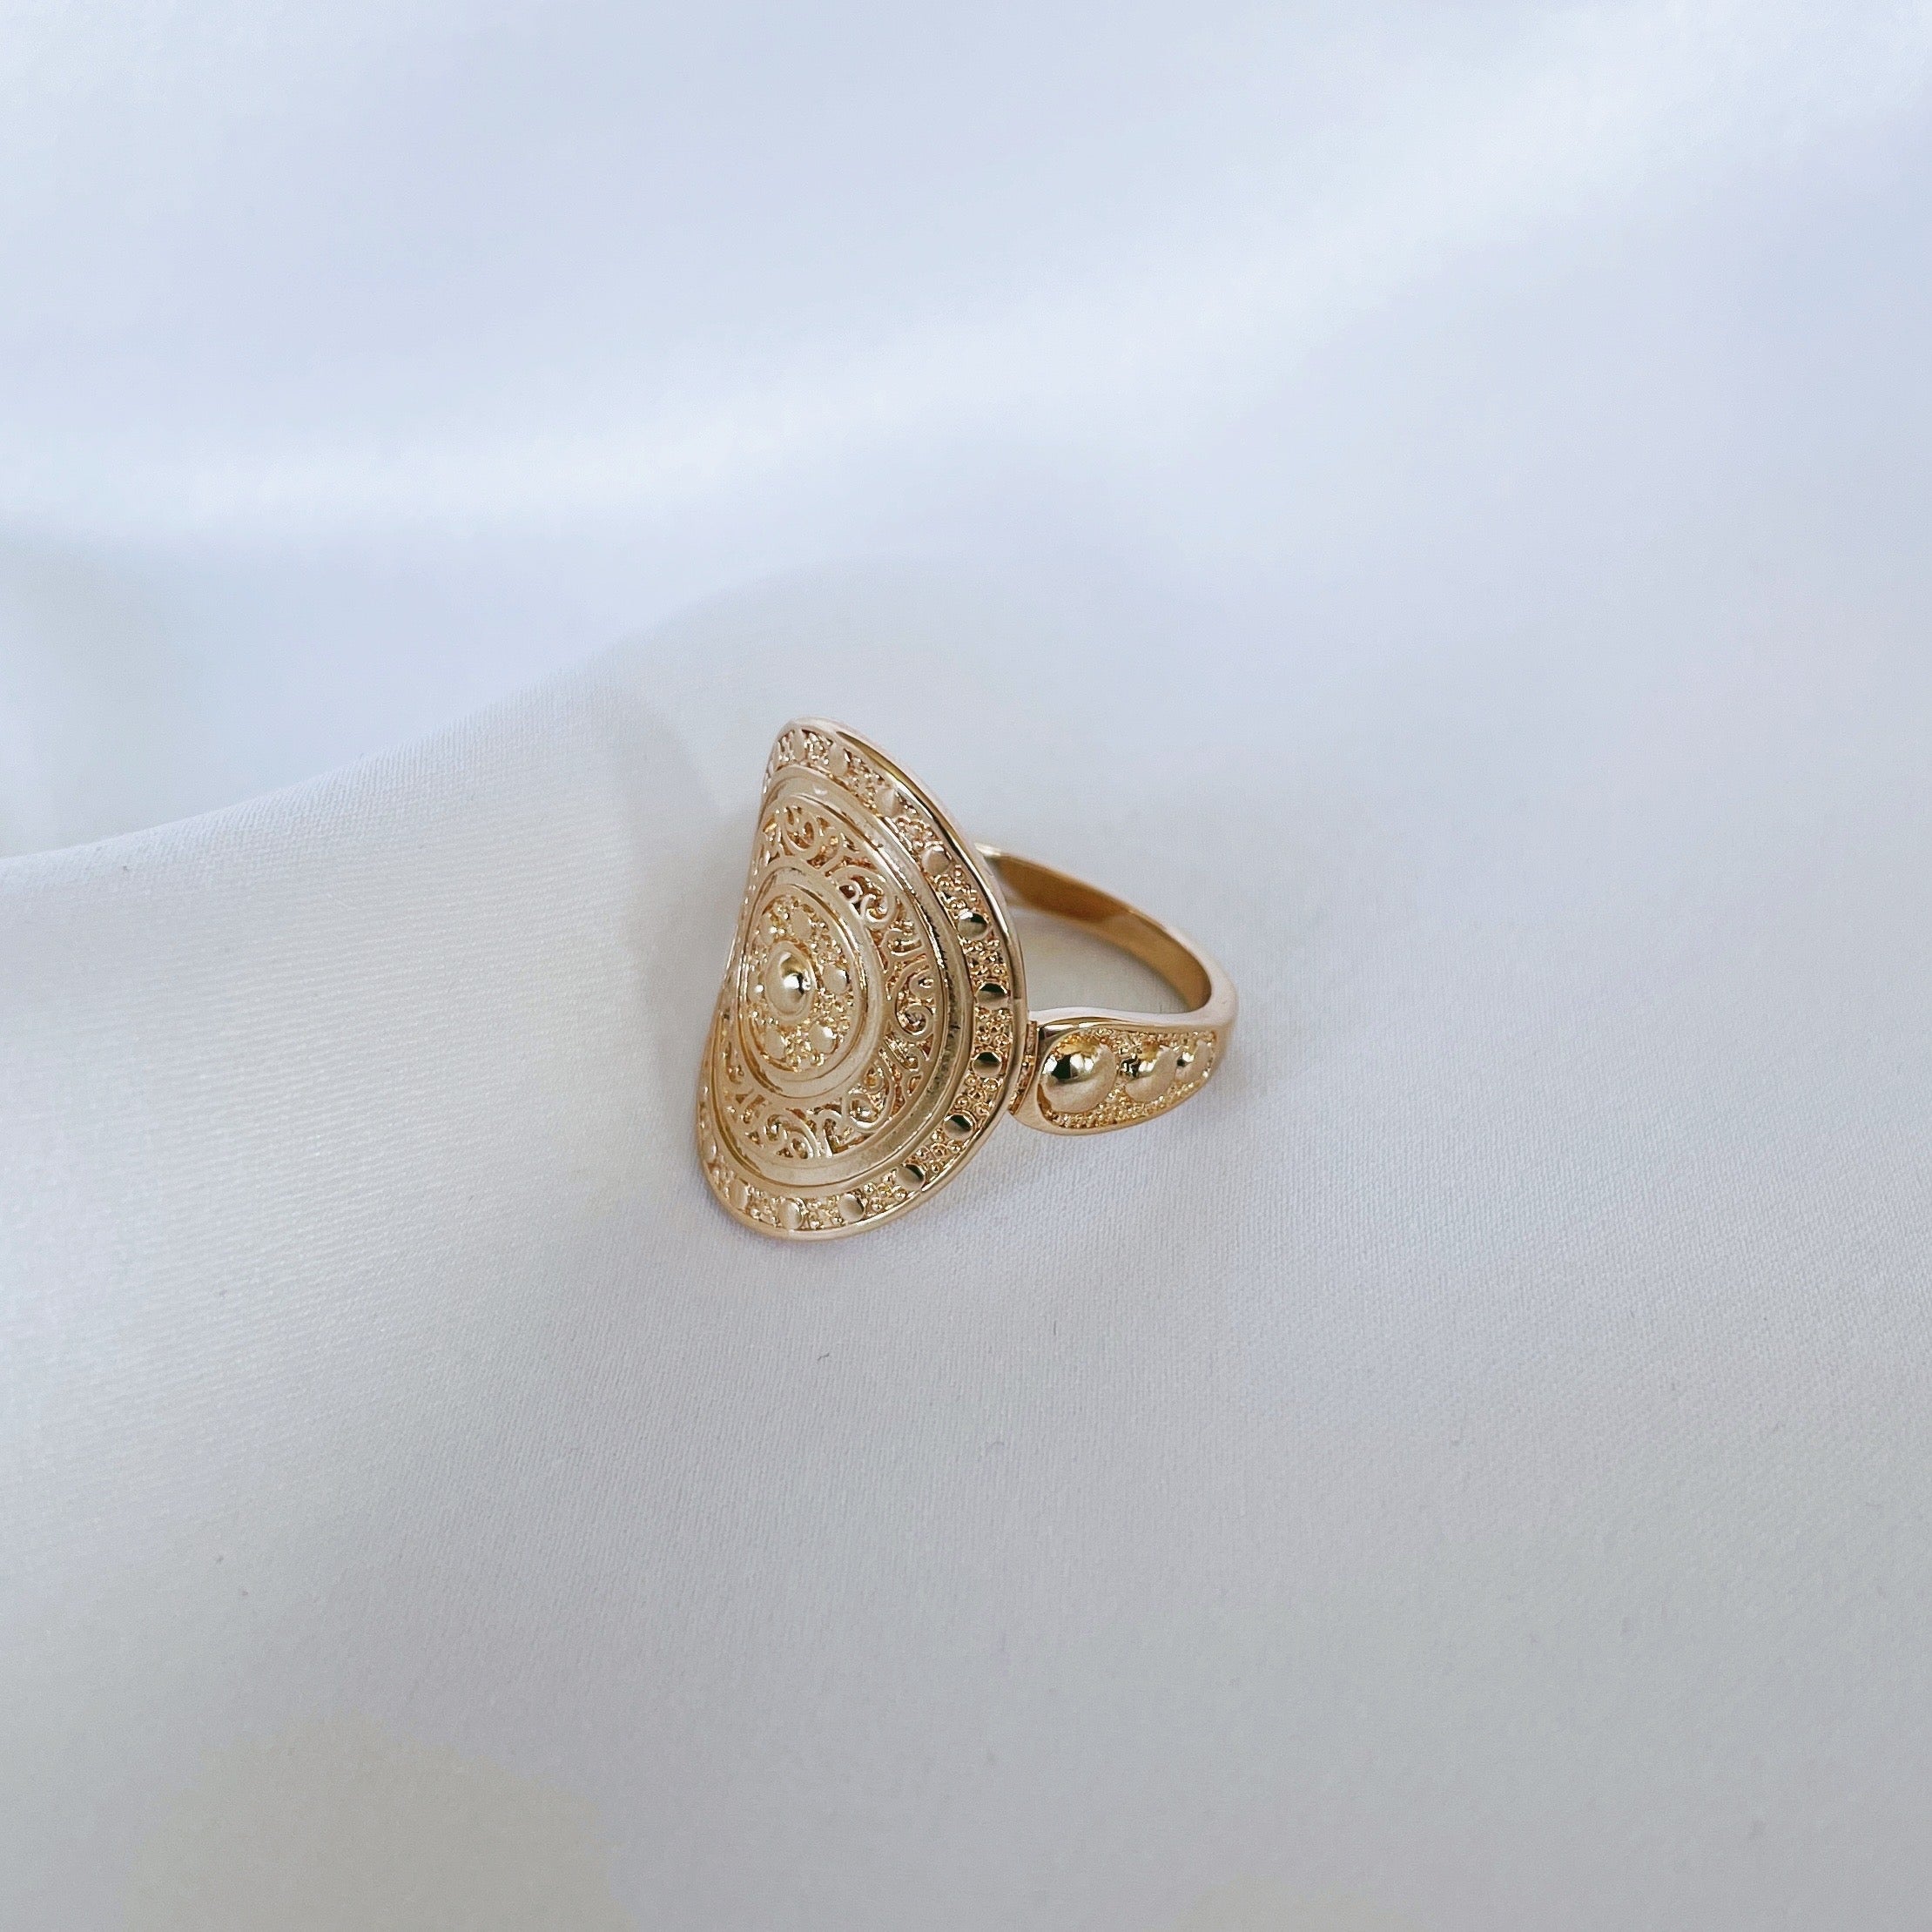 Gold-plated “Medal” ring